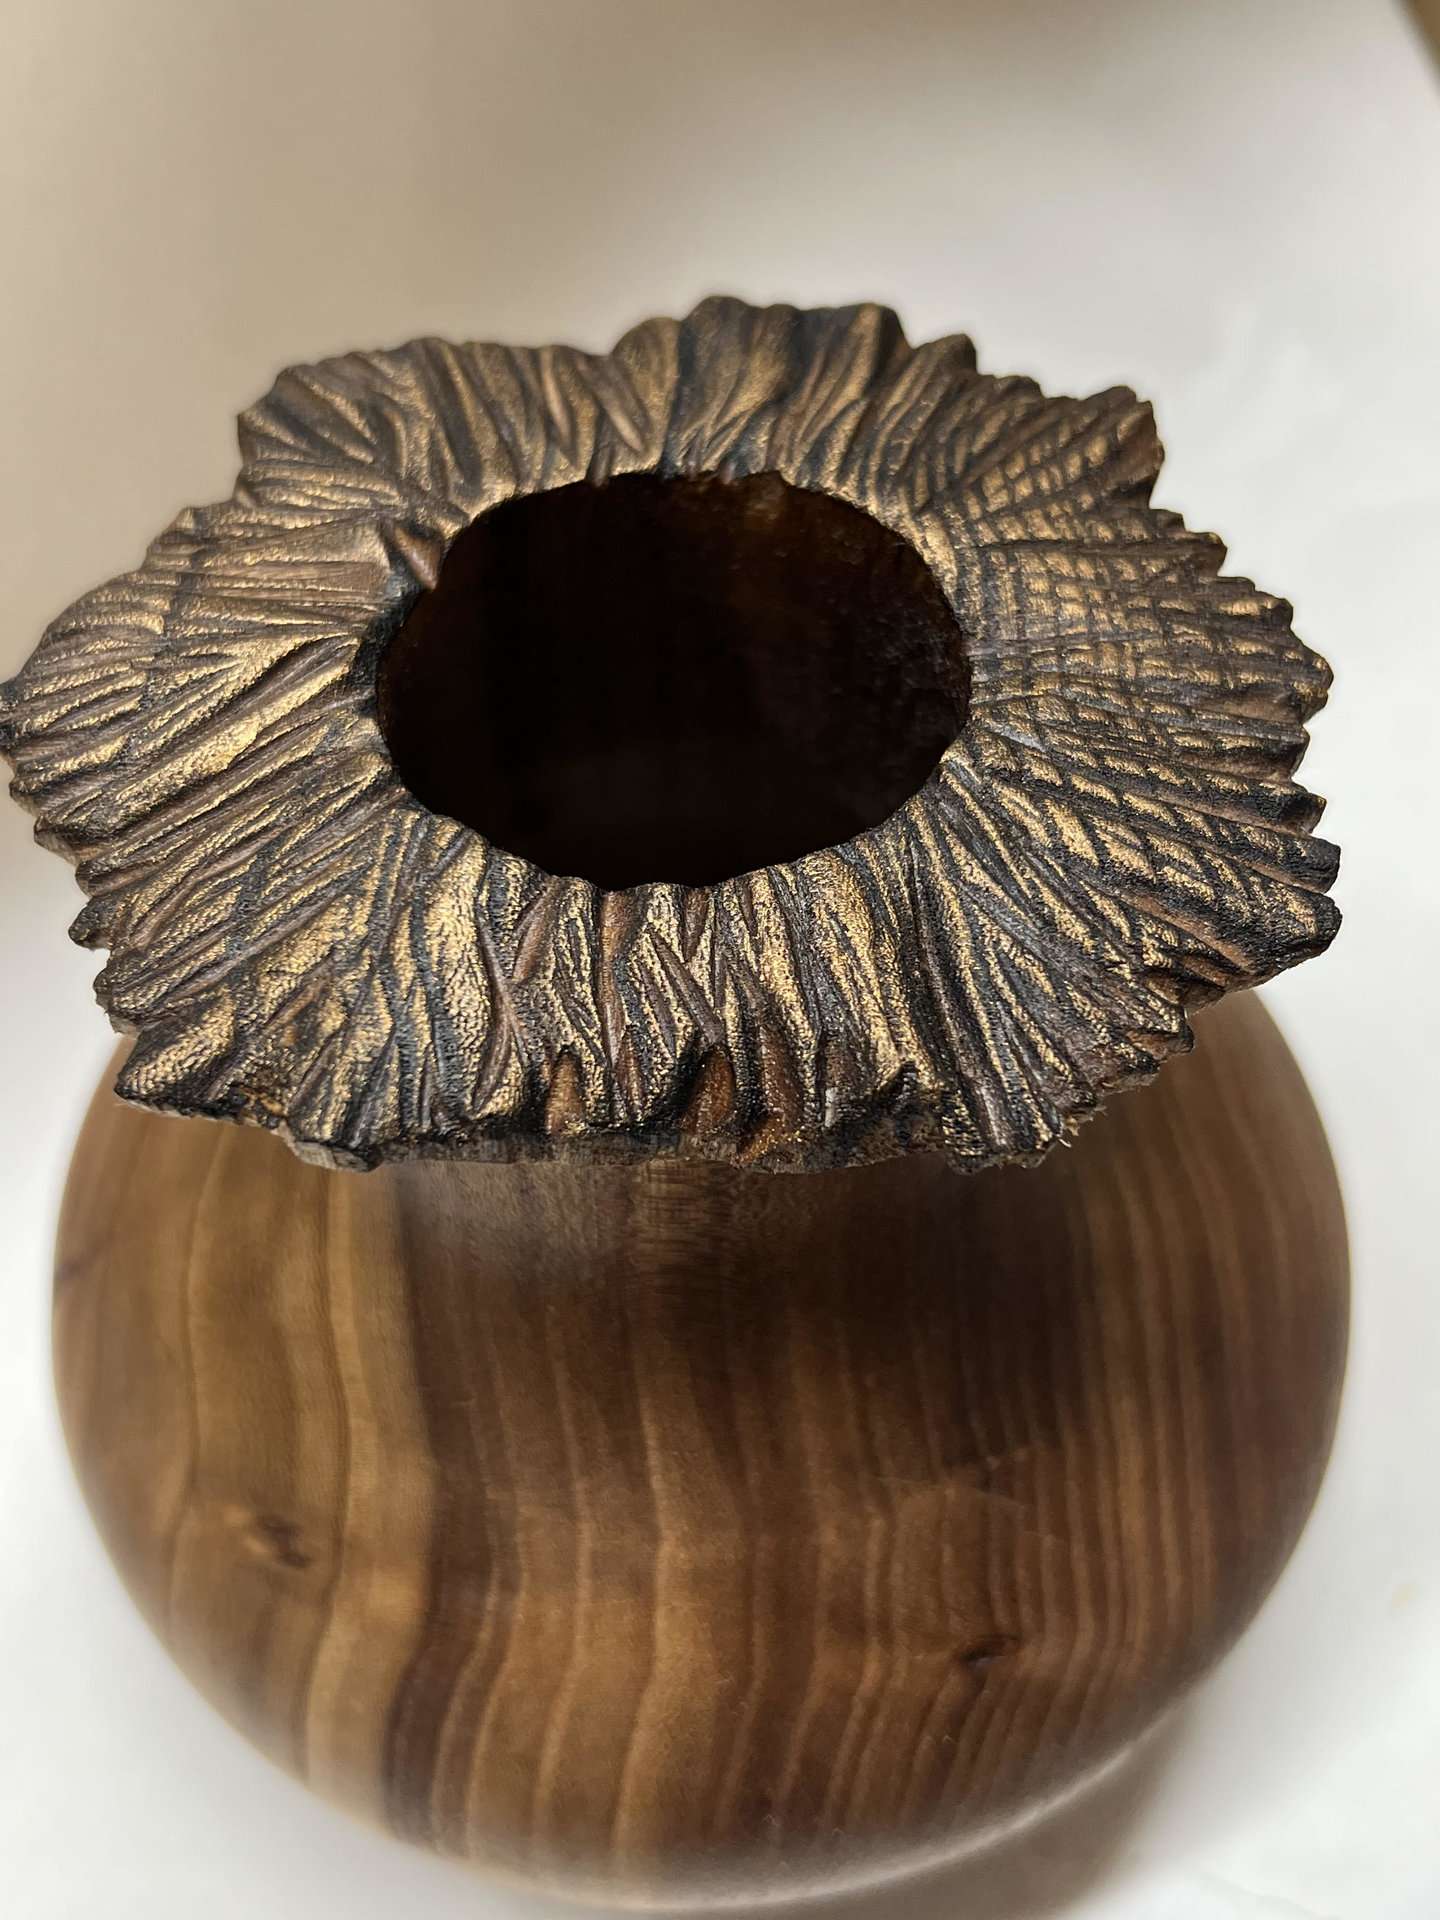 Elm Carved Hollow Form (Pic #2)